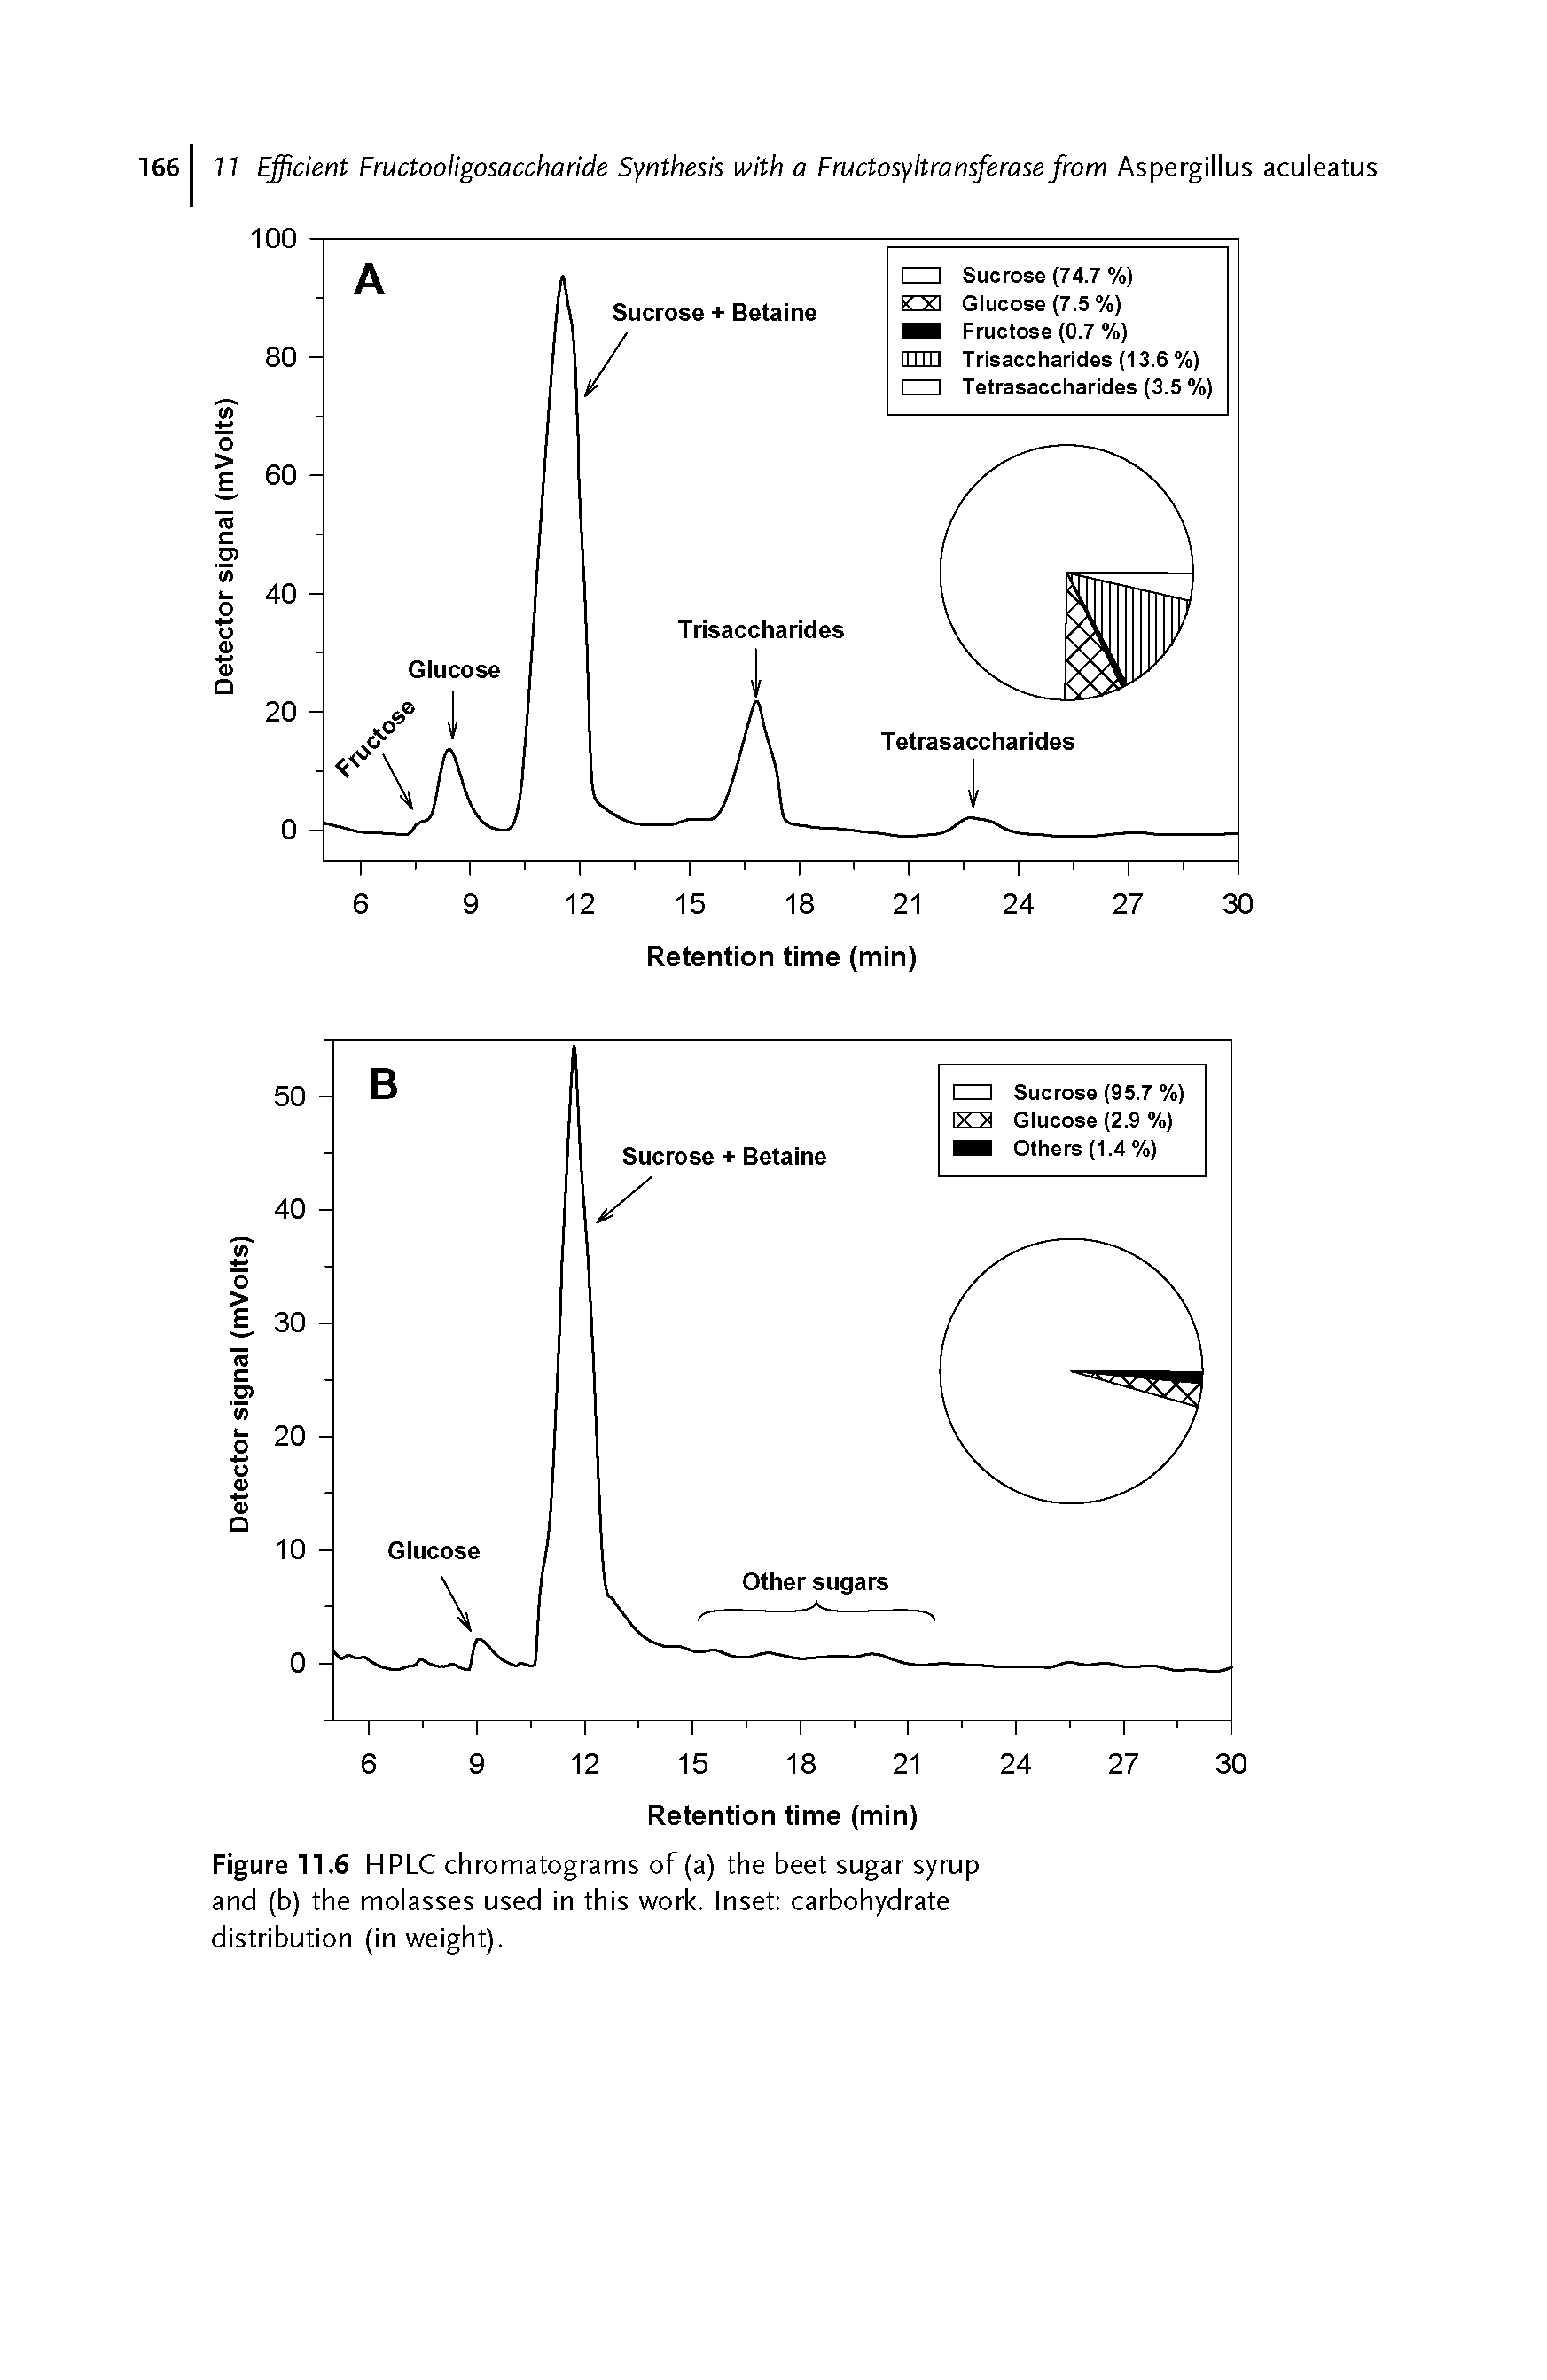 Figure 11.6 HPLC chromatograms of (a) the beet sugar syrup and (b) the molasses used in this work. Inset carbohydrate distribution (in weight).